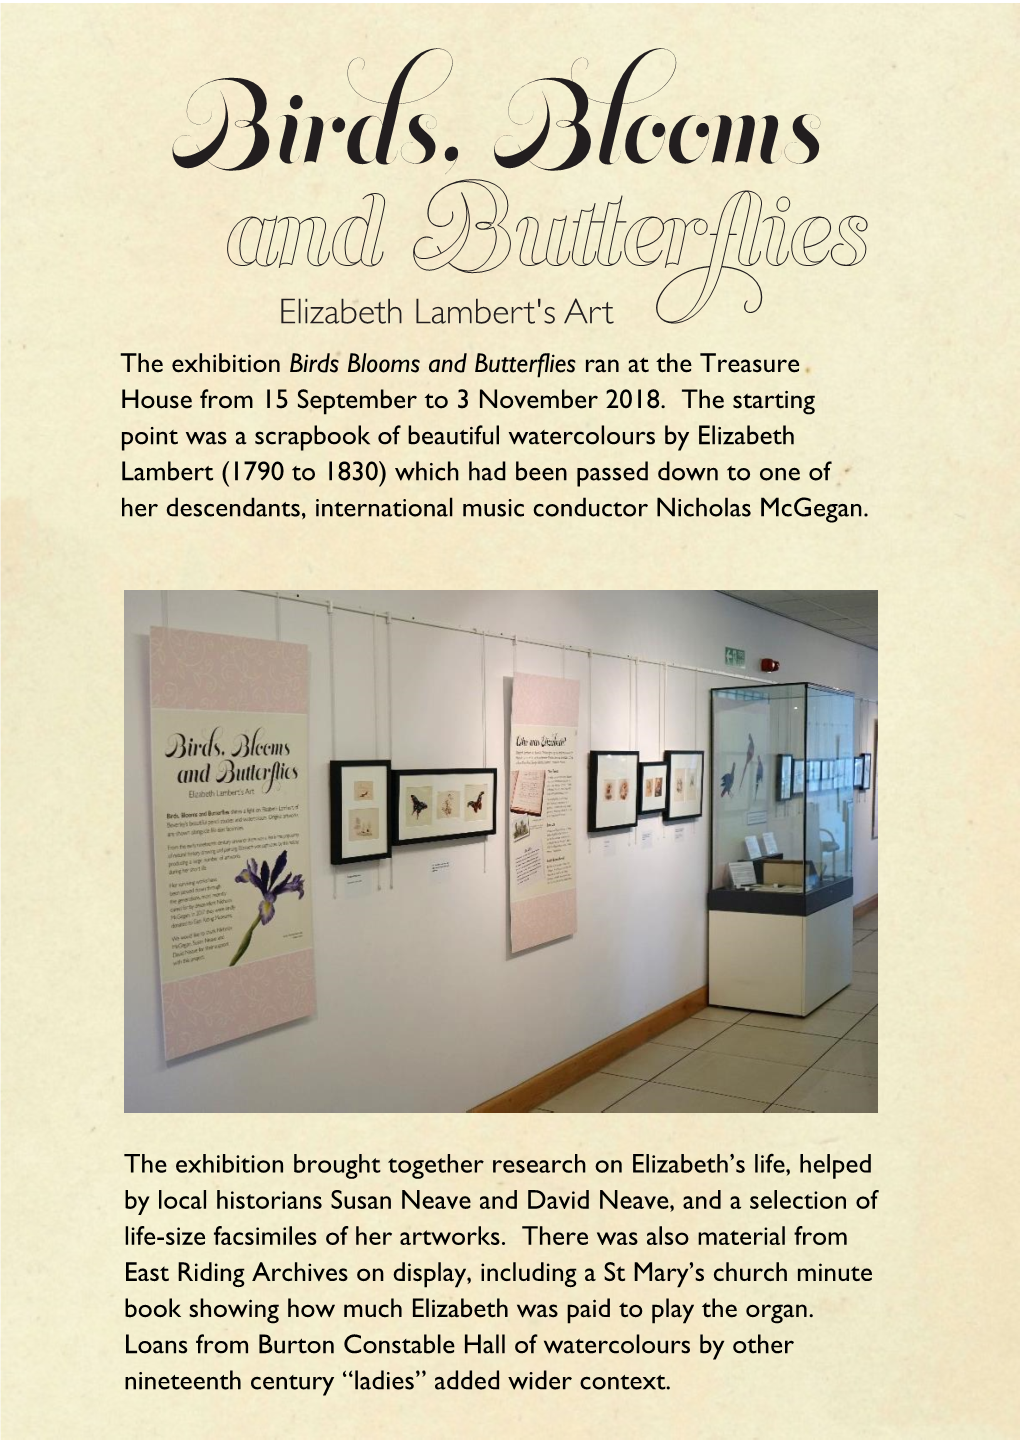 Elizabeth Lambert's Art the Exhibition Birds Blooms and Butterflies Ran at the Treasure House from 15 September to 3 November 2018